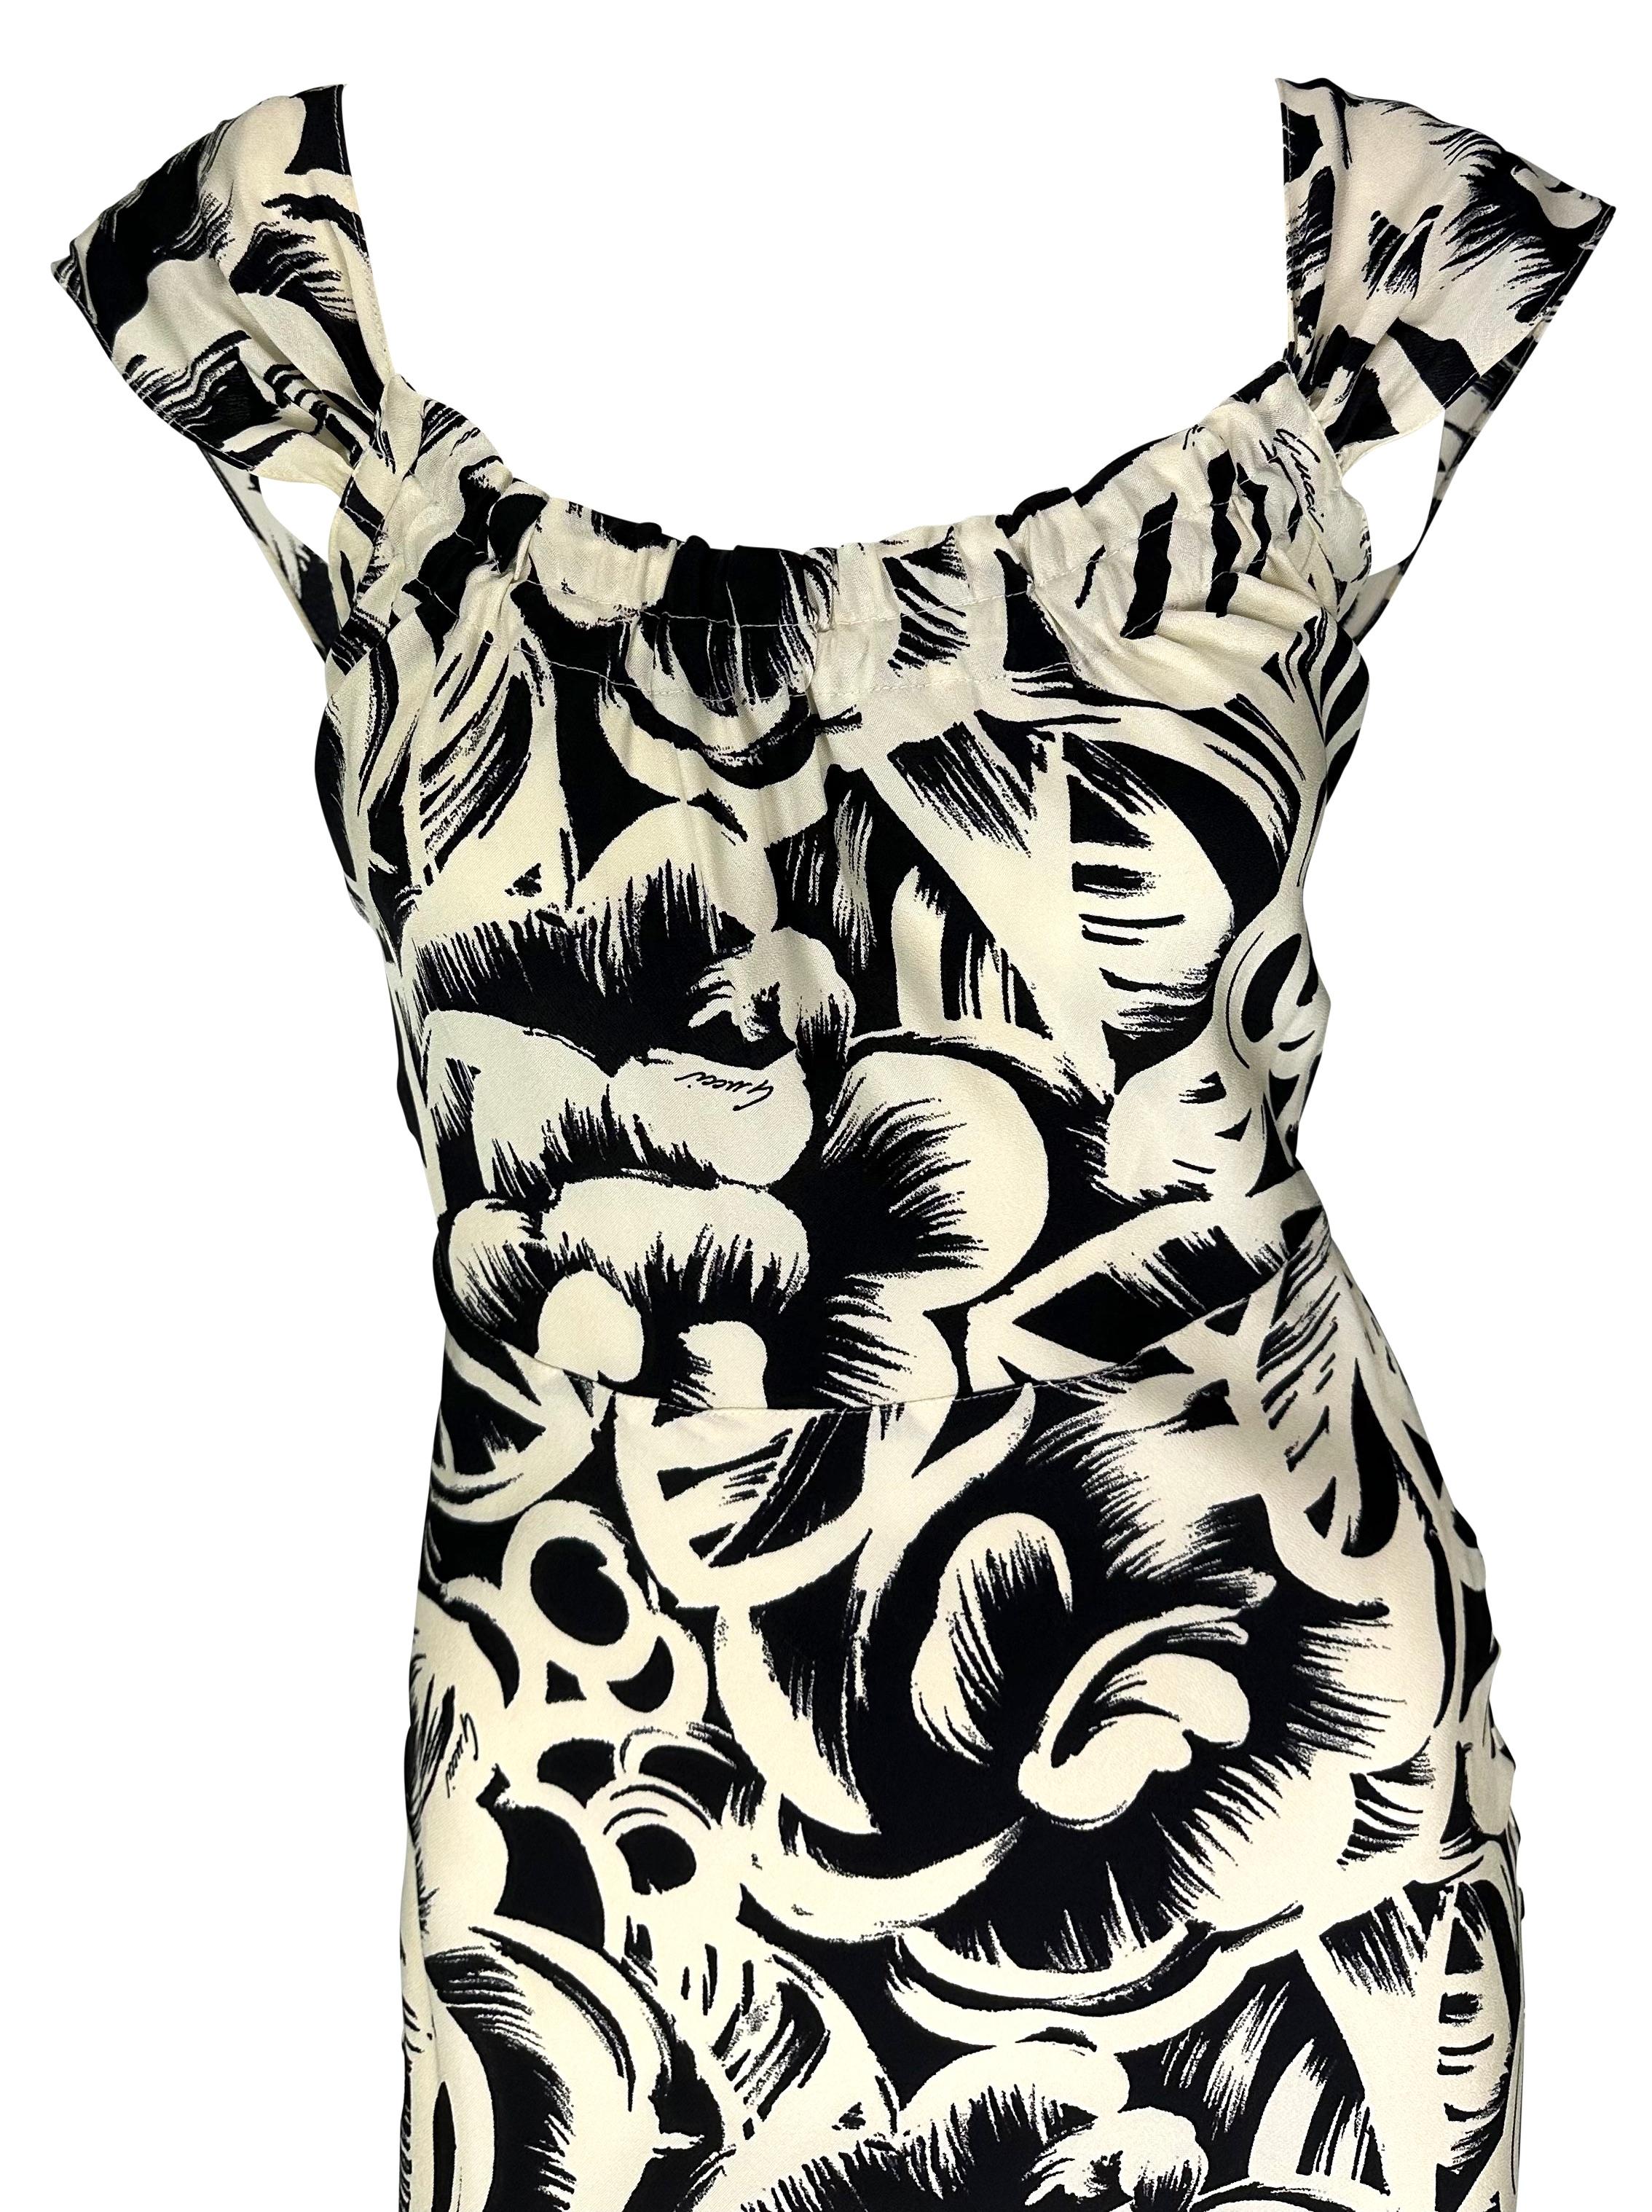 Presenting a beautiful black and white floral Gucci dress, designed by Tom Ford. From 2002, this dress features a wide neckline, off-the-shoulder petal-style sleeves, and is made complete with a semi-exposed back. Add this Gucci by Tom Ford creation